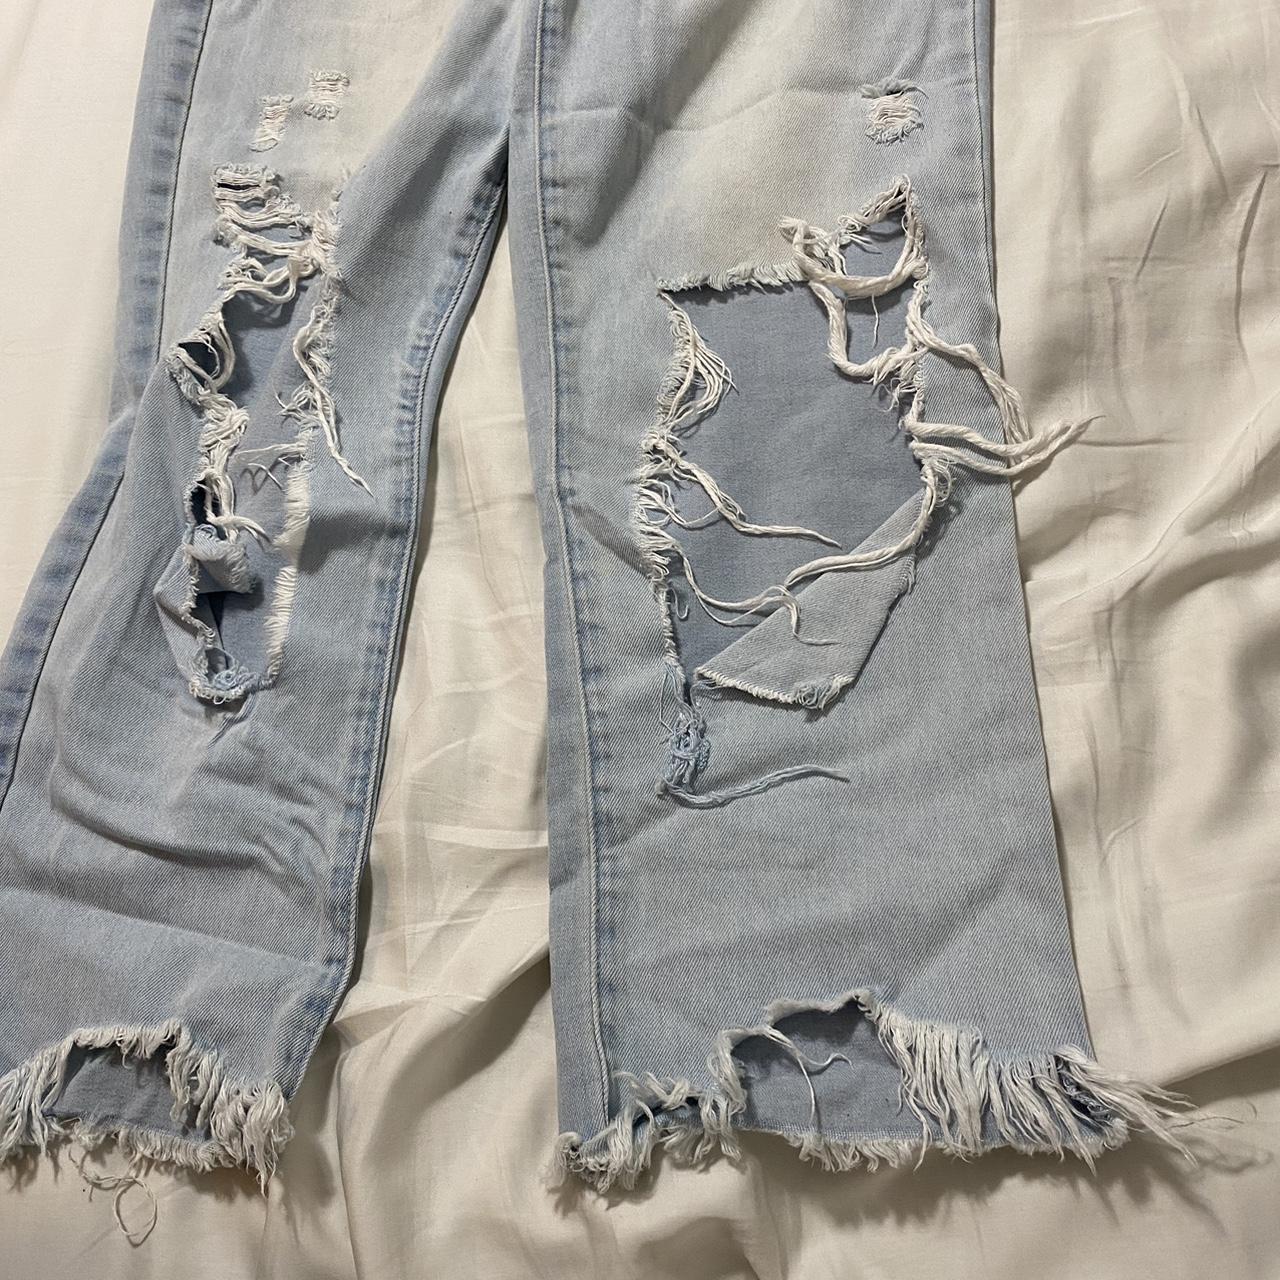 Distressed Light Wash Jeans Size 7/28 ★ small... - Depop